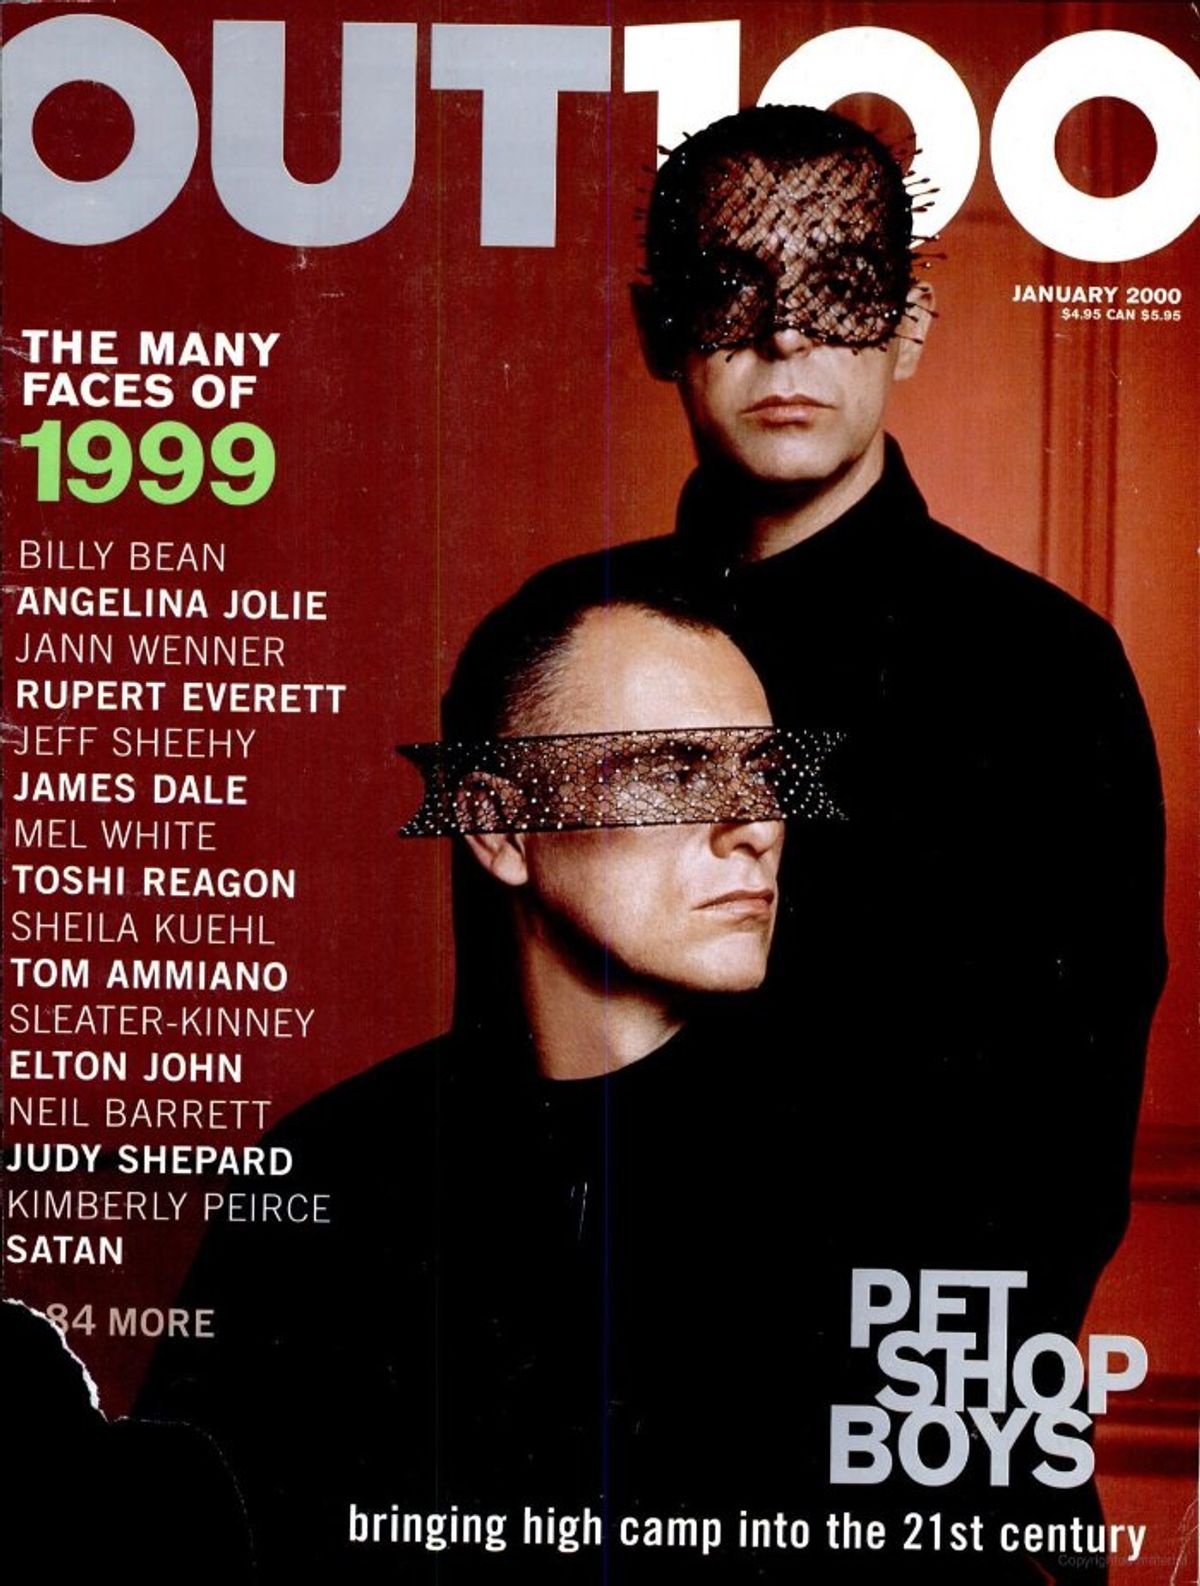 
The Pet Shop Boys closed out the millennium on the Out100 in 1999
